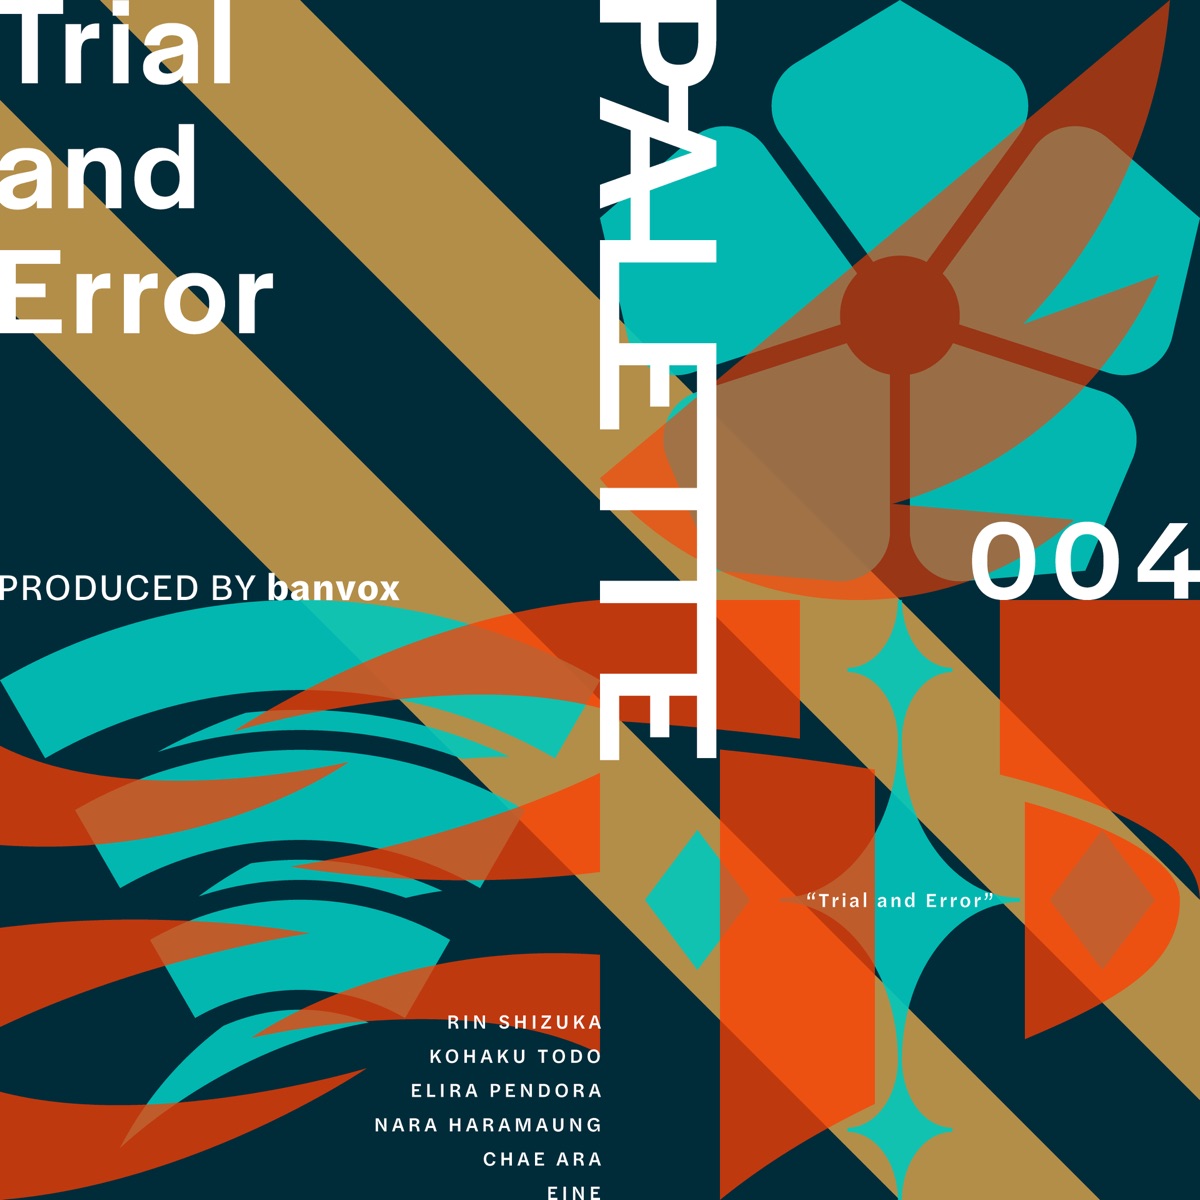 Cover art for『NIJISANJI EN - Trial and Error (English Ver.) feat. Elira Pendora』from the release『Trial and Error